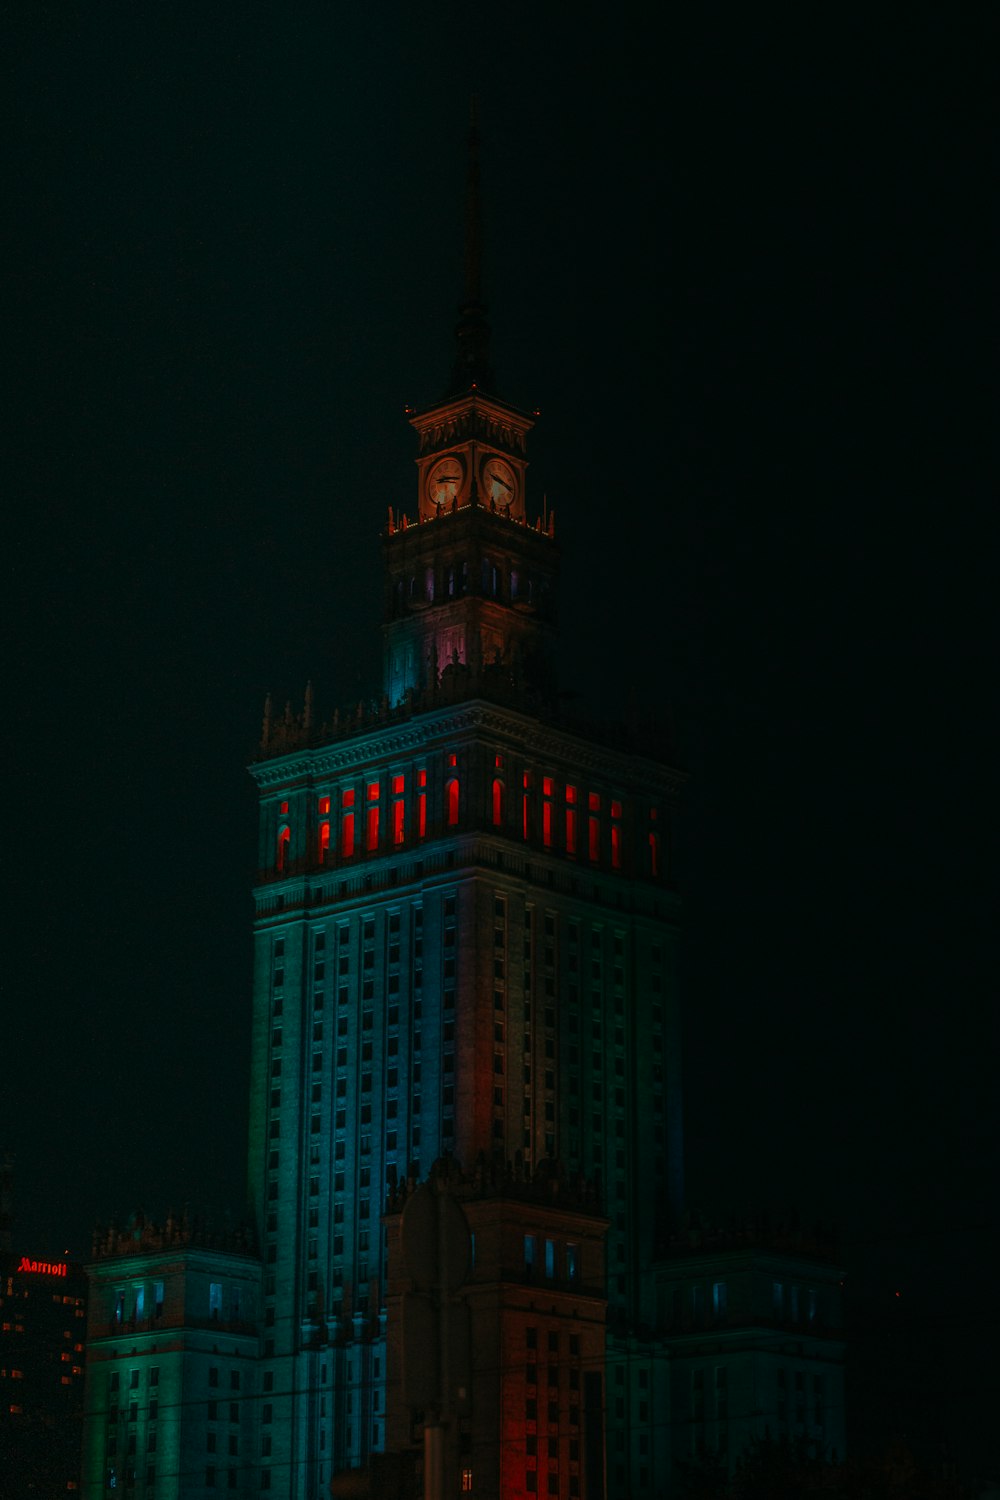 a tall building with a clock tower lit up at night